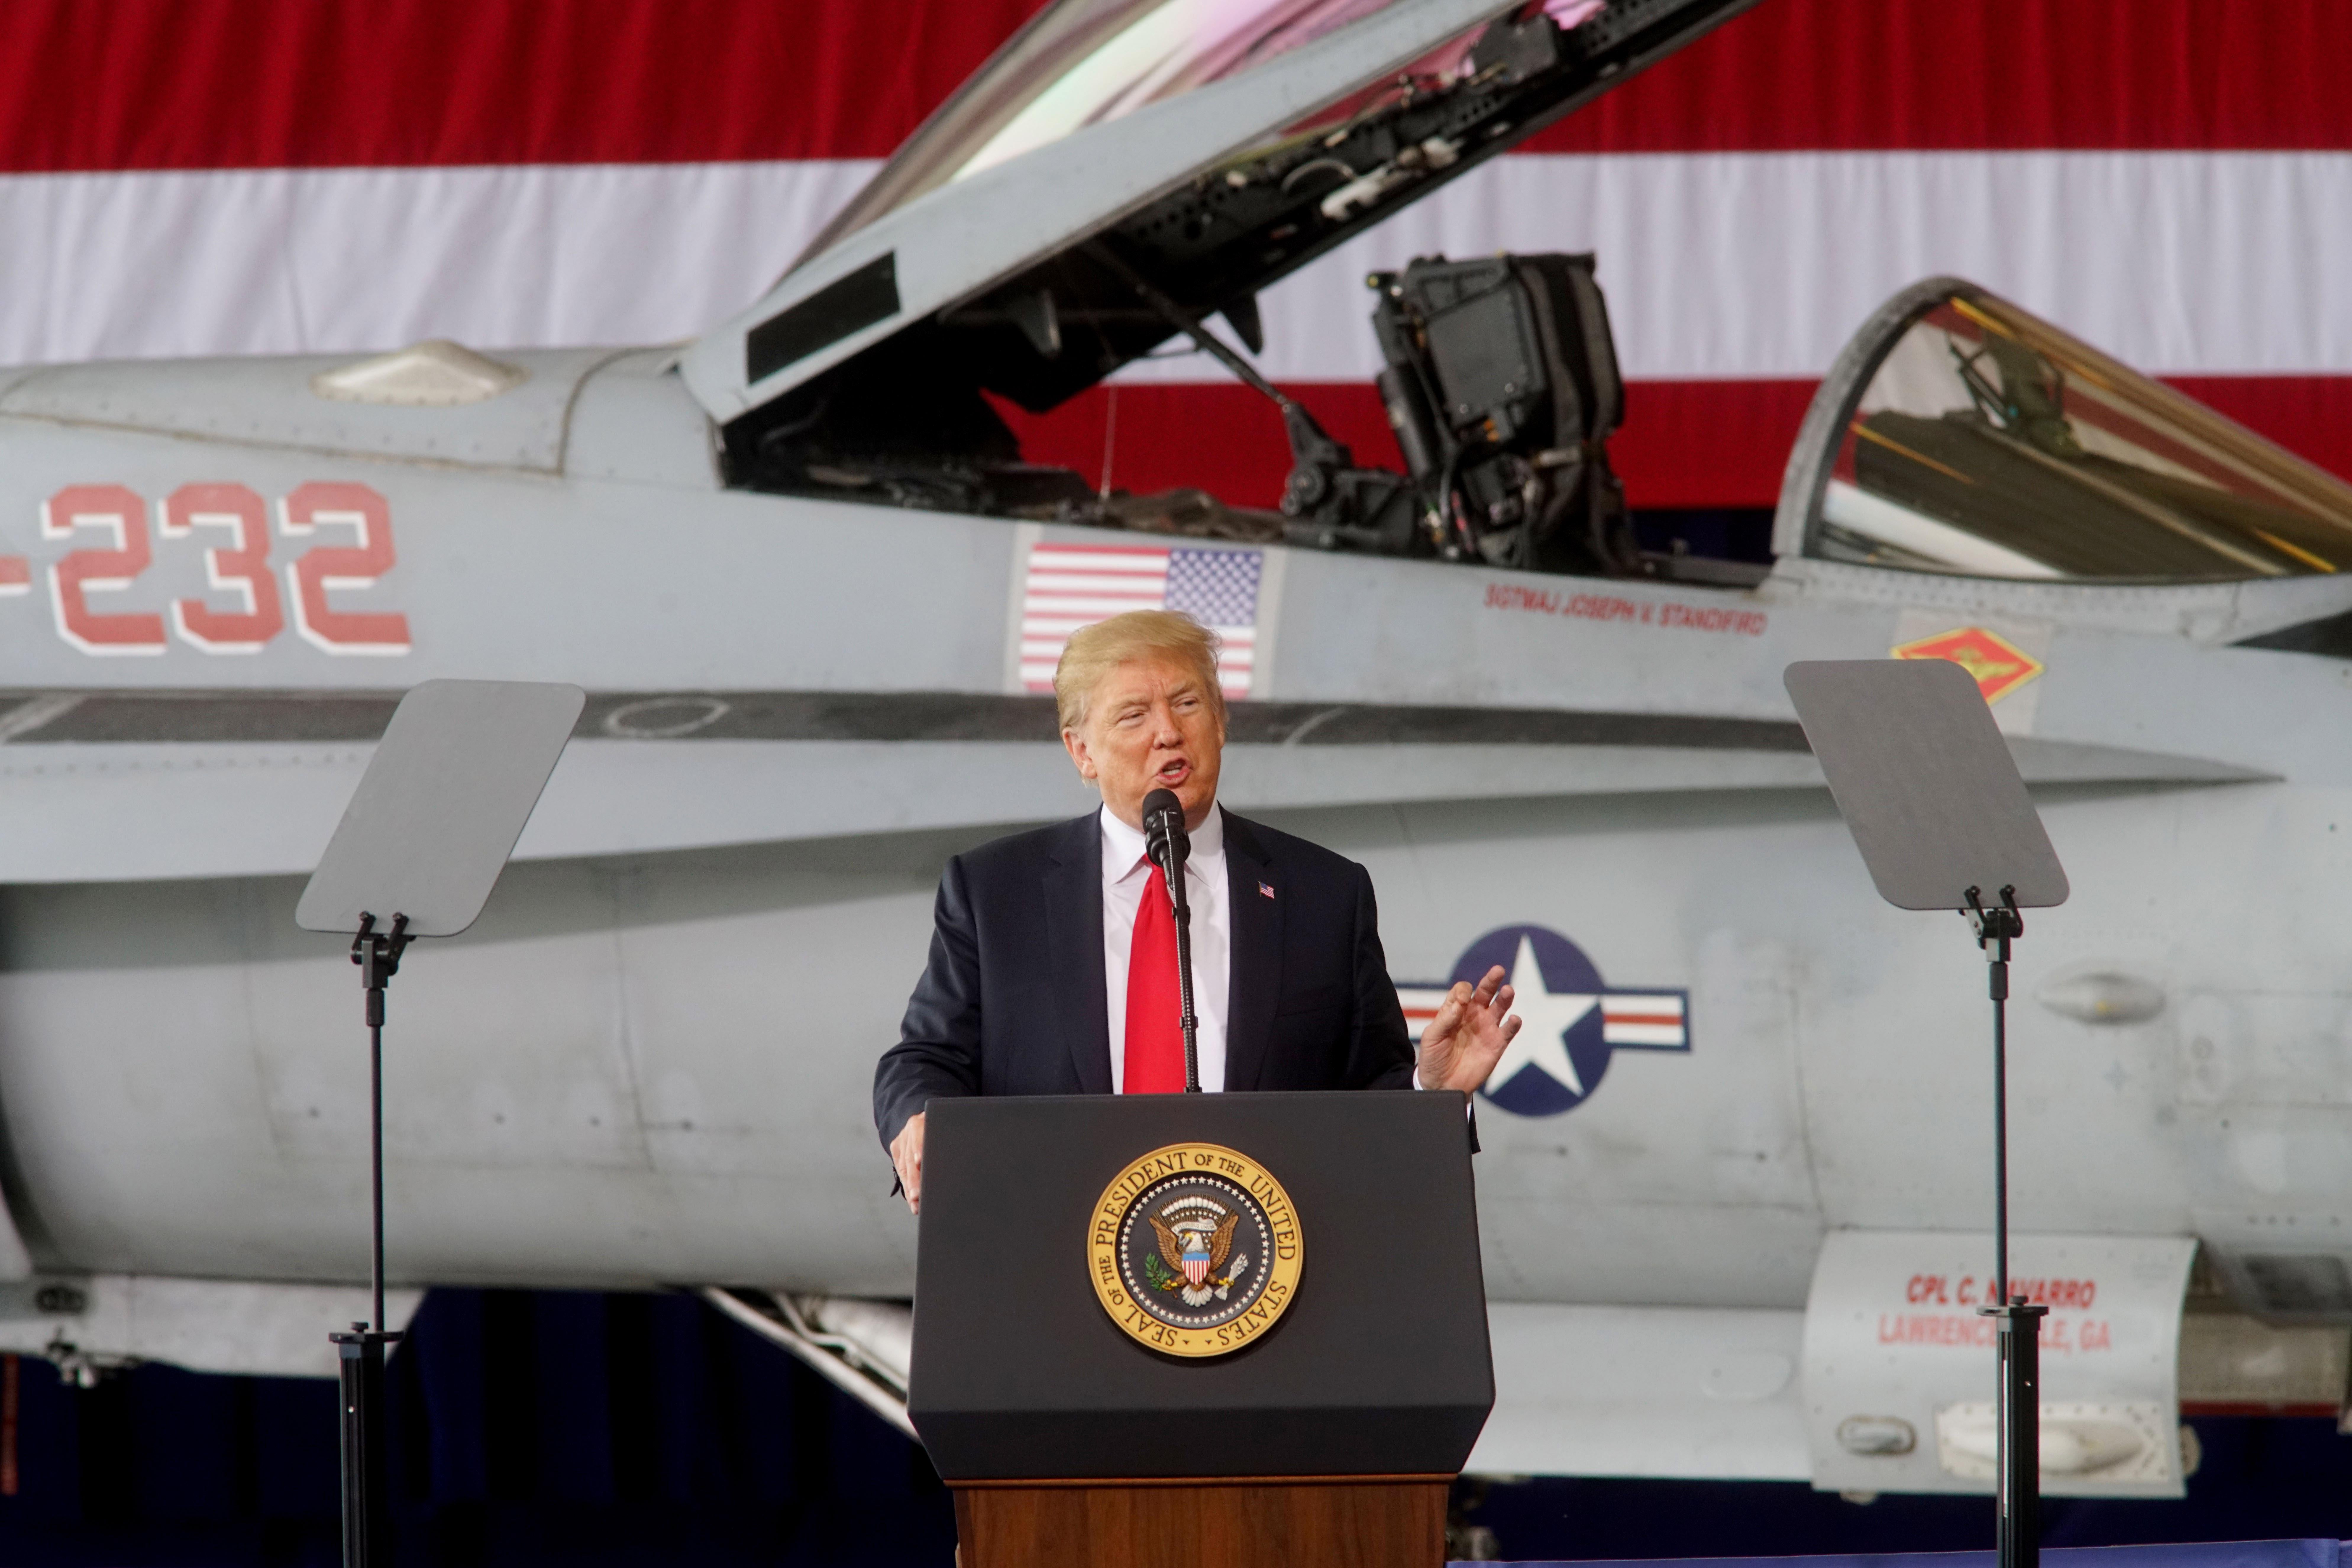 SAN DIEGO, CA - MARCH 13:  President Donald Trump addresses troops at Miramar Marine Corp Air Station on March 13, 2018 in San Diego, California.  President Trump, on his first visit to California, will view the prototype border walls and then attend a fundraiser in Beverly Hills. (Photo by Sandy Huffaker/Getty Images)